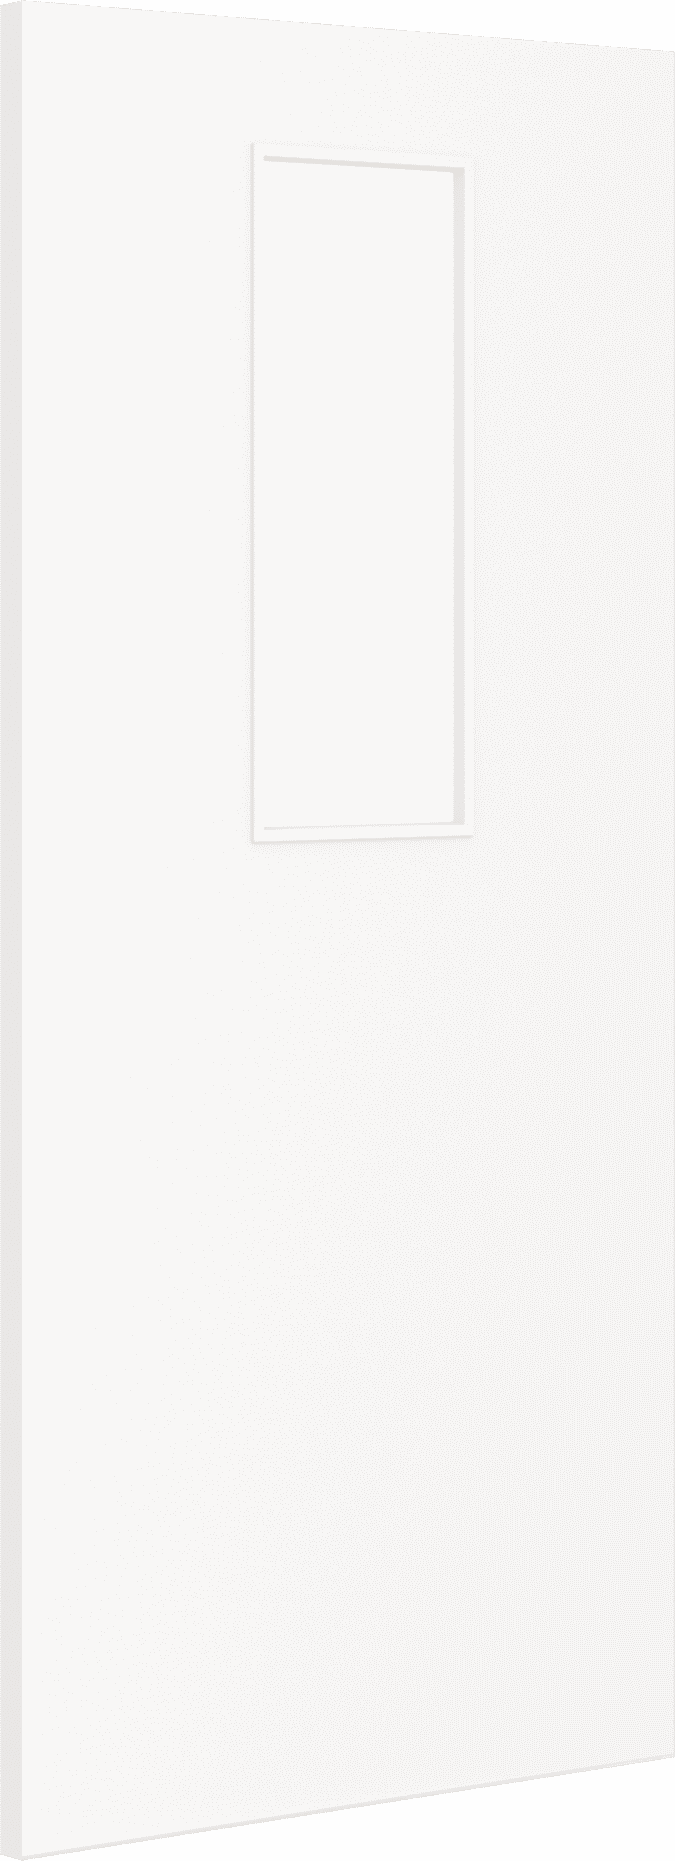 1981mm x 838mm x 44mm (33") Architectural Paint Grade White 14 Clear Glazed Fire Door Blank